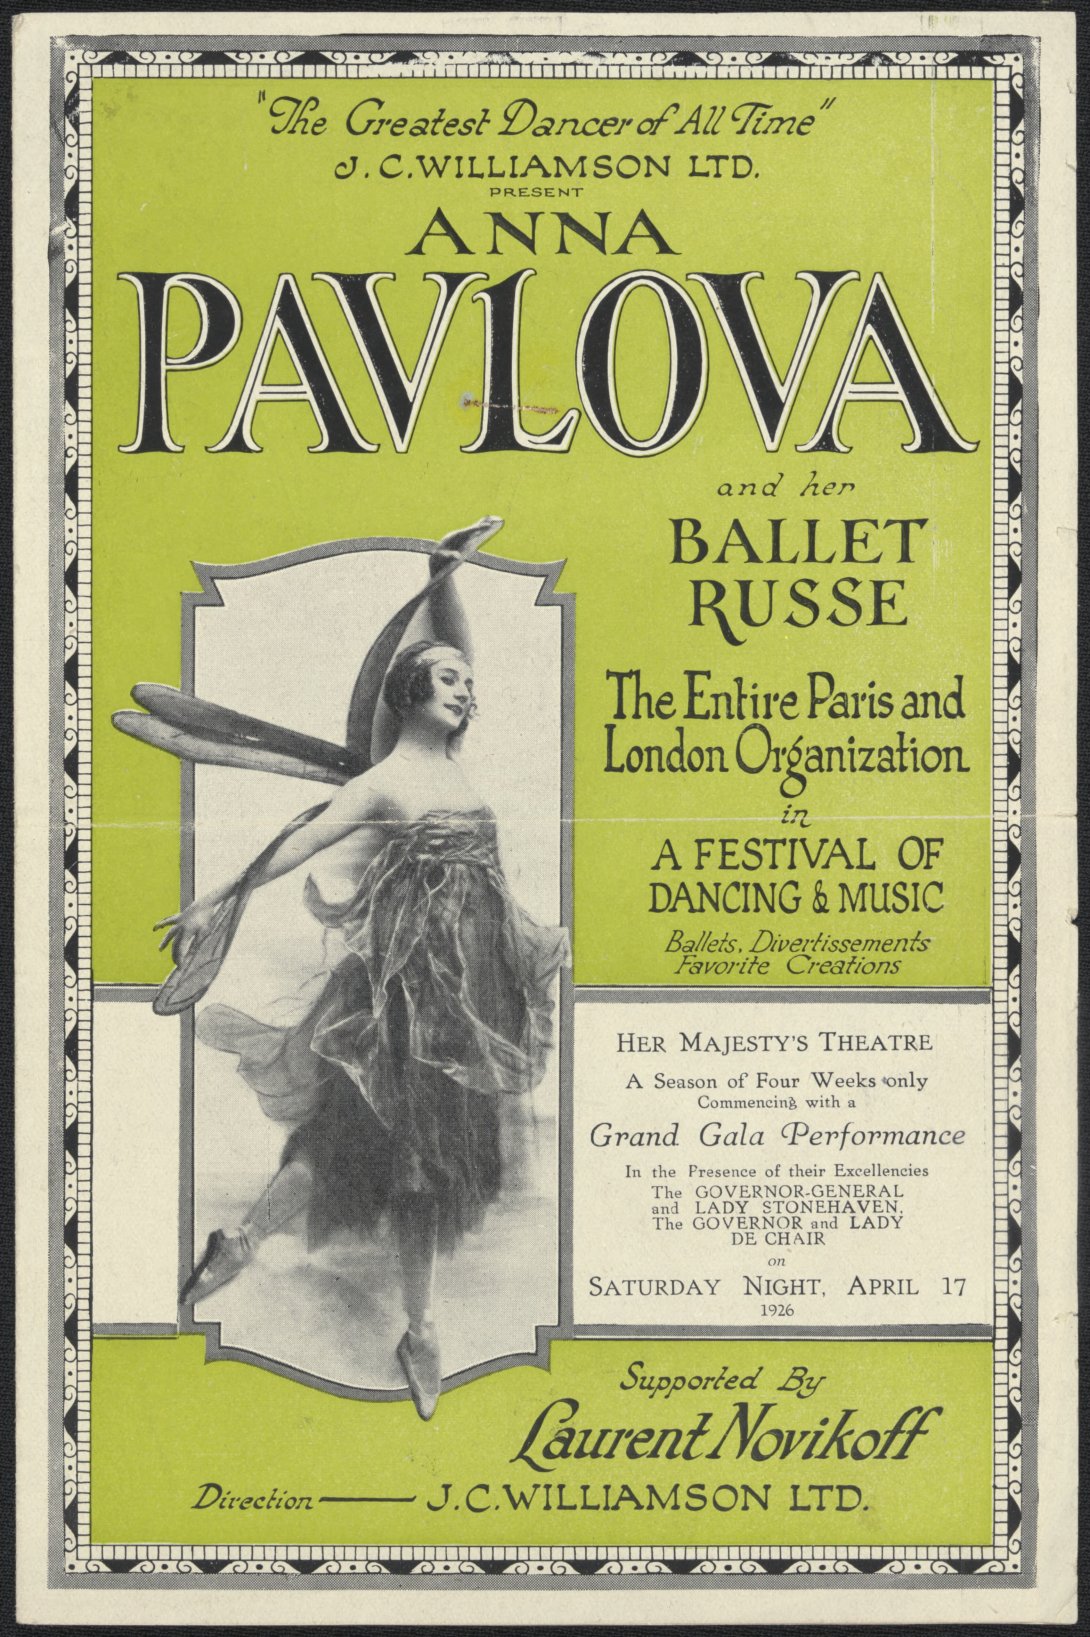 Poster for Anna Pavlova dancing with the Ballet Russe featuring black text on a lime green background